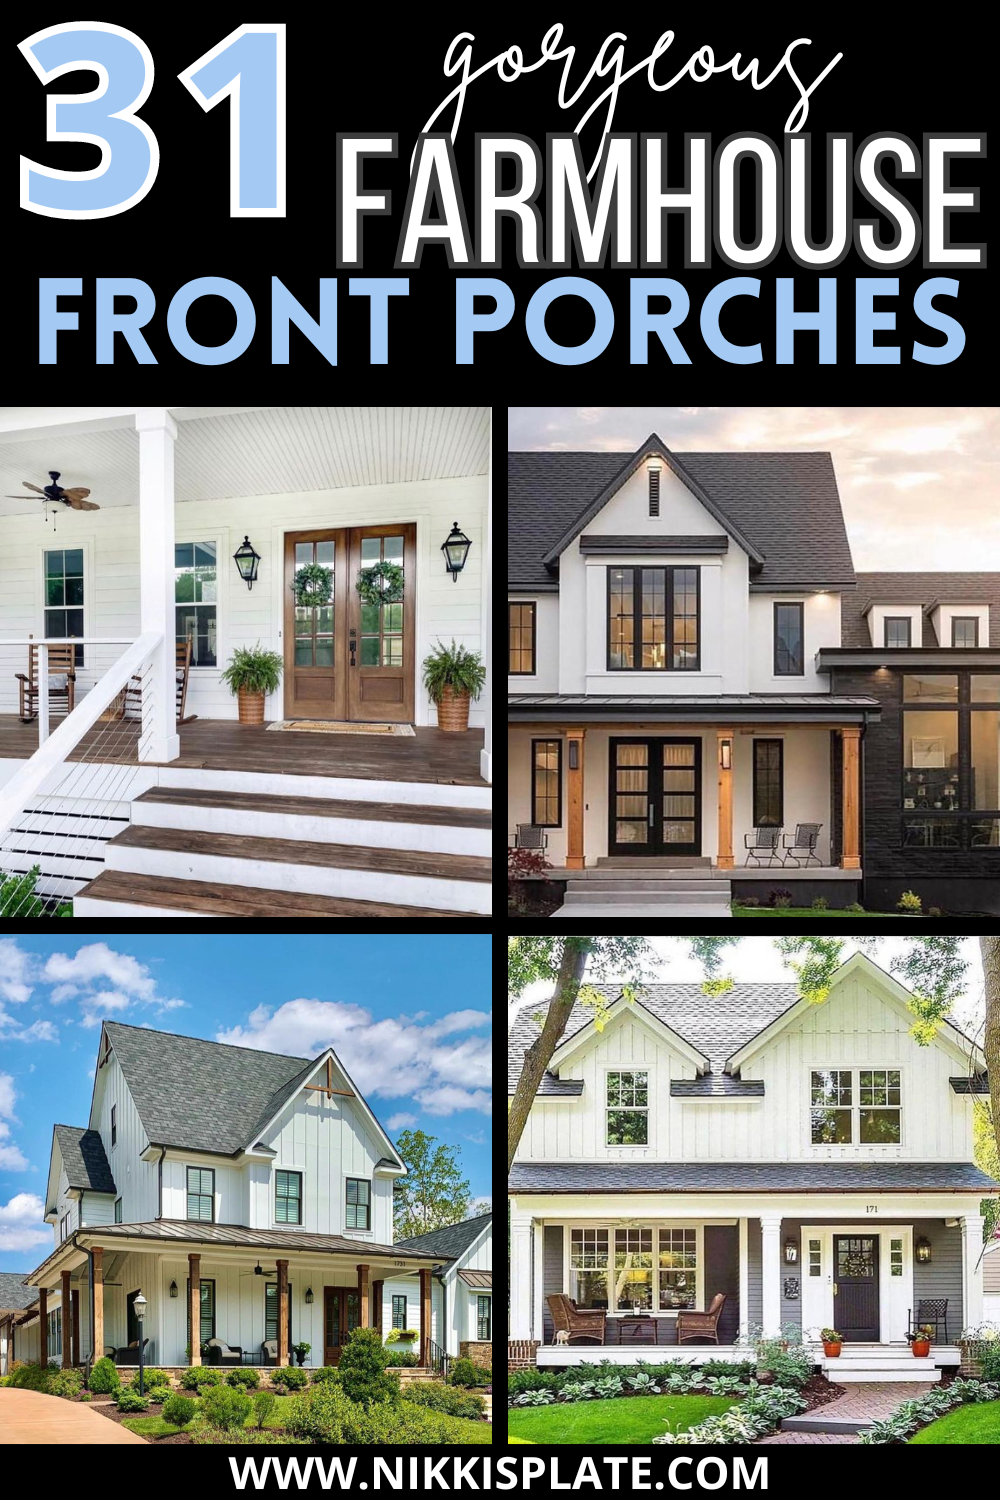 Beautiful Farmhouse Front Porches; These country farmhouse front porches are a dream for those who might want to add some charm to their home.